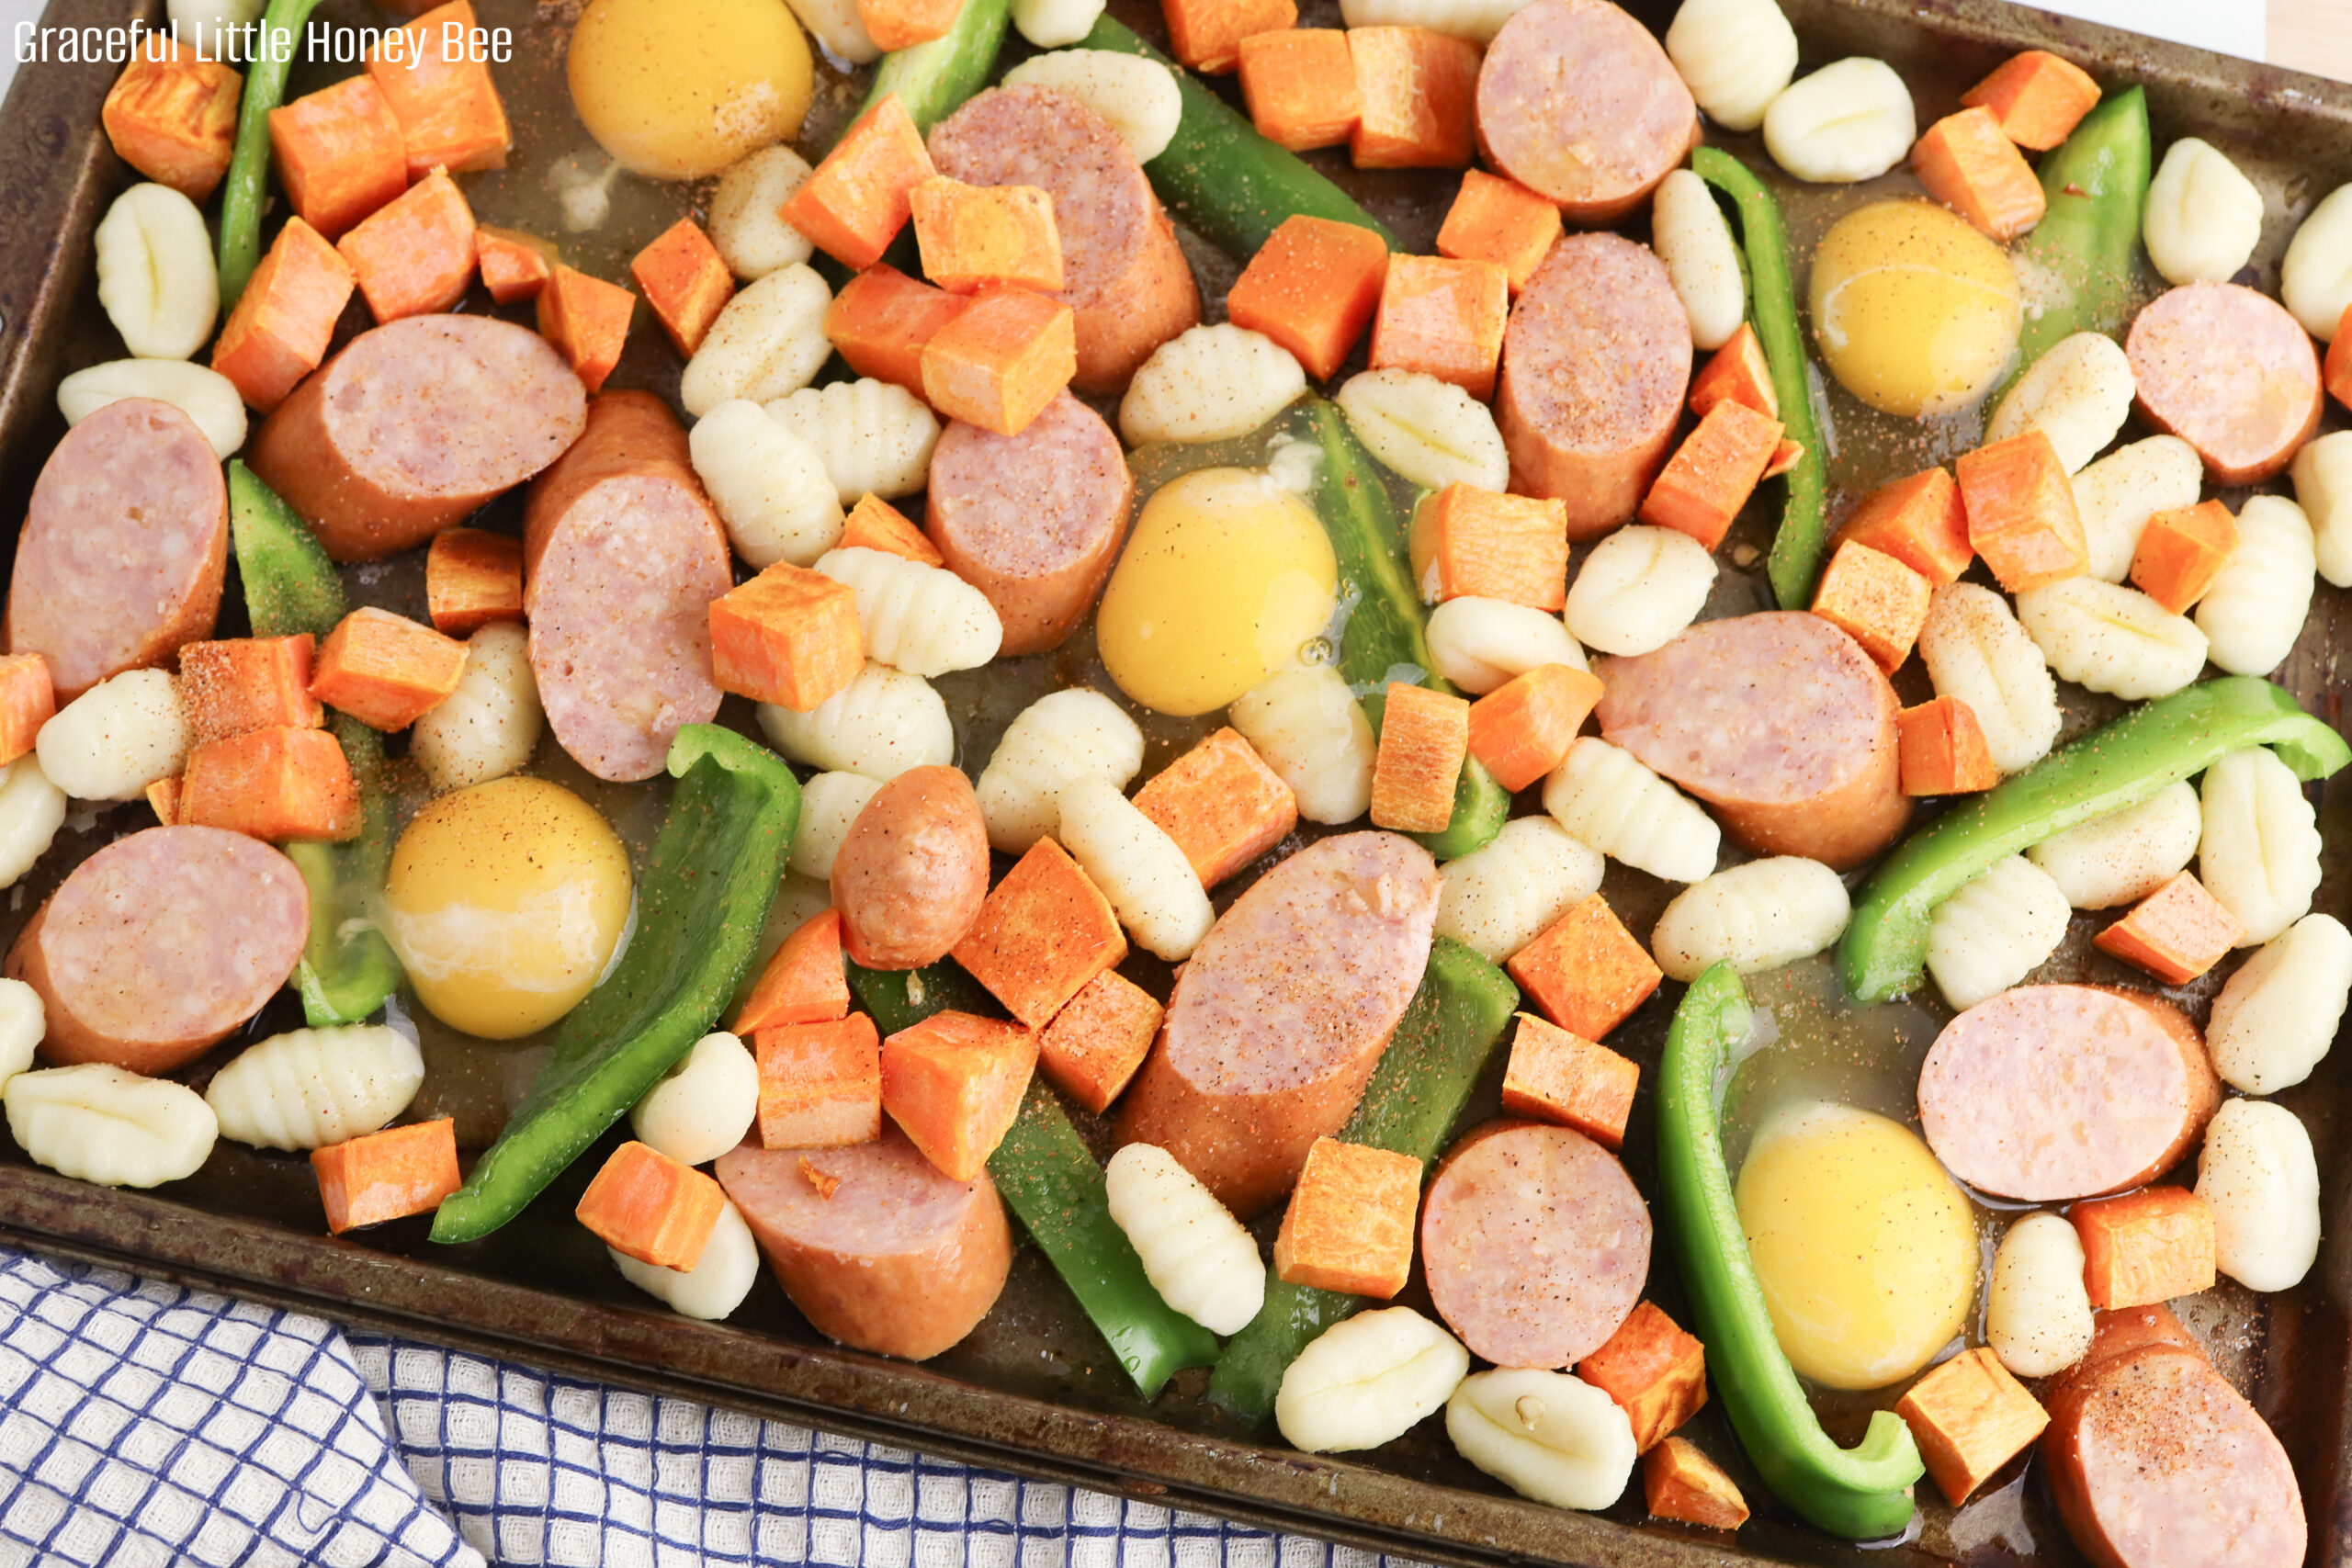 Diced sweet potatoes, sliced bell pepper, sliced sausage, gnocchi and egg sitting on a baking sheet before going into the oven.